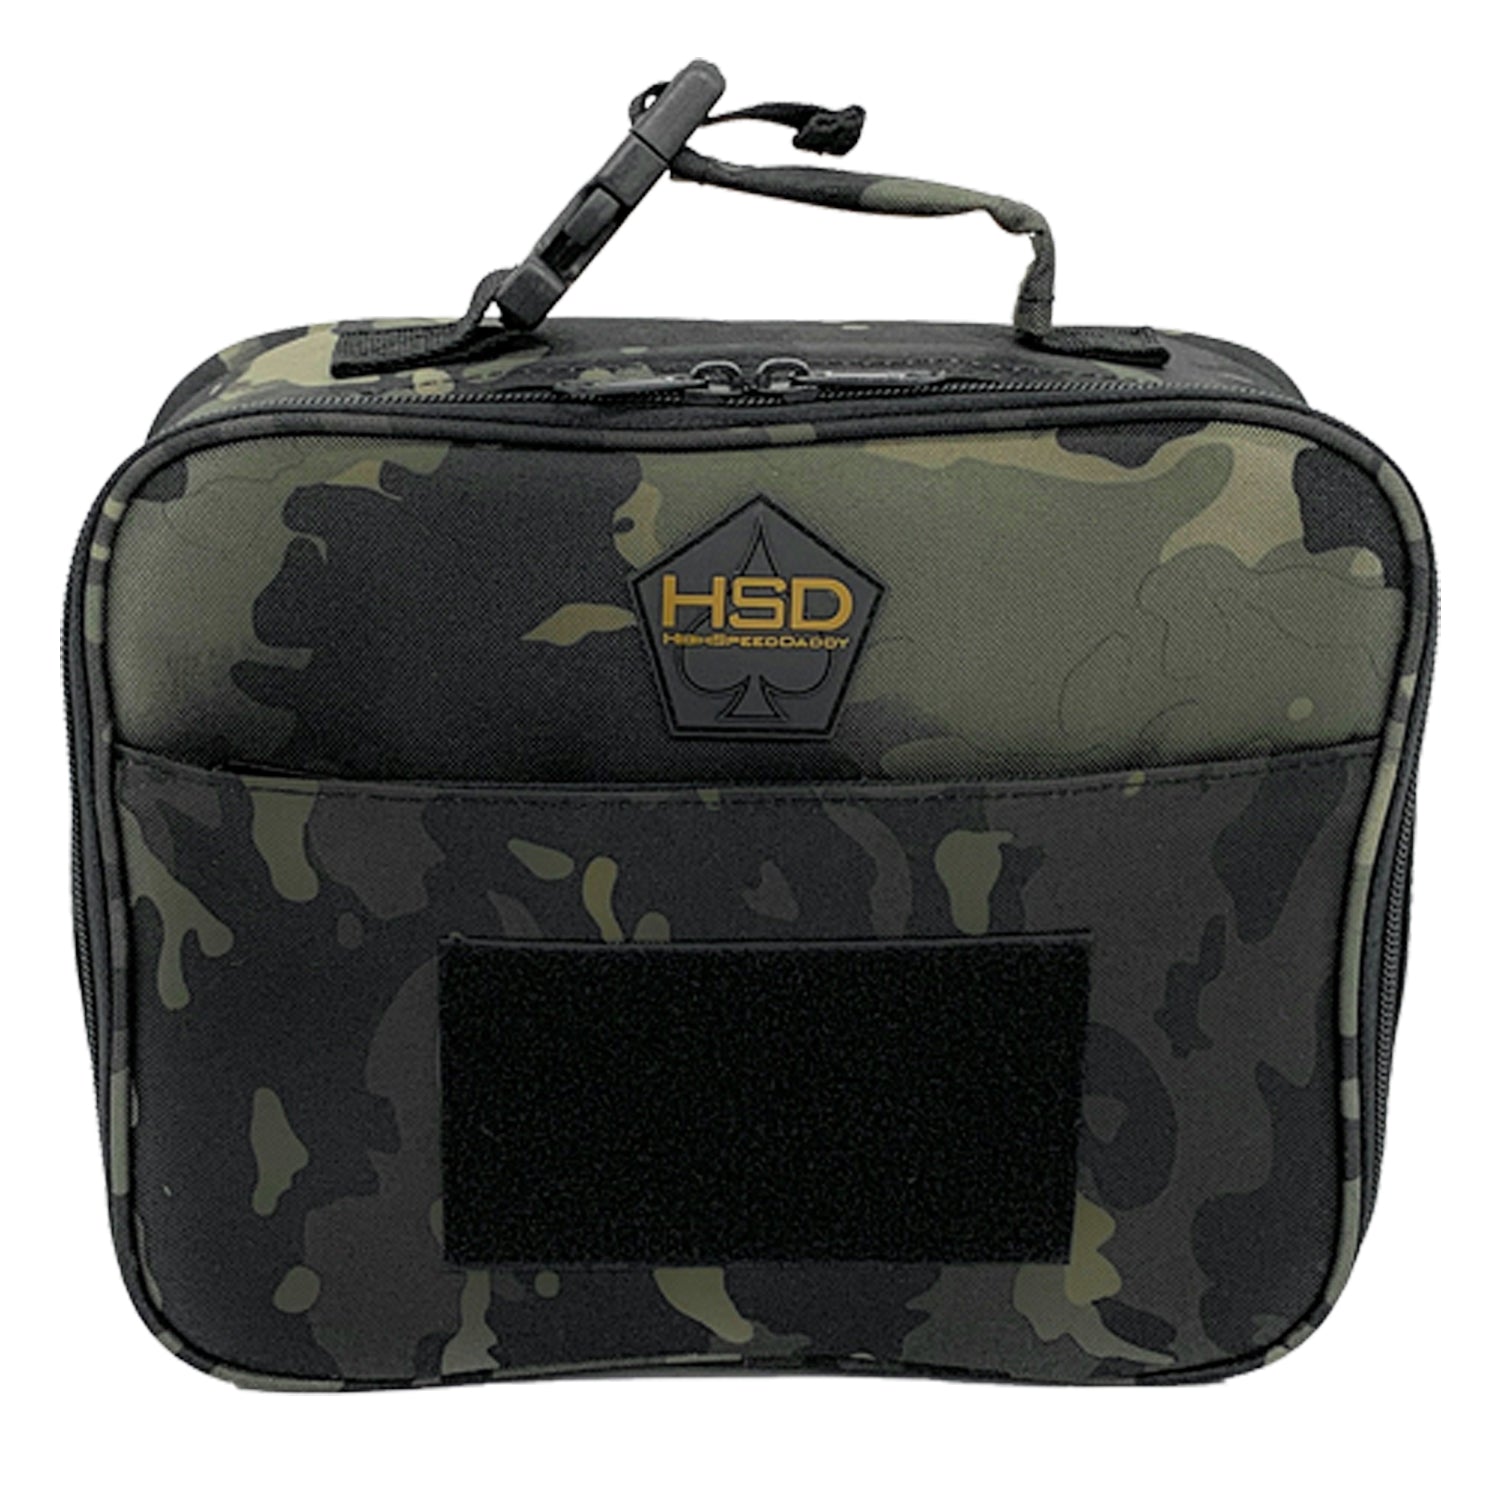 Buy Insulated Lunch Bag Camo Cooler Bag Portable Carrying Lunch Box Bag for  Boys Girls Women Men to School Office Outdoor Online at Low Prices in India  - Amazon.in